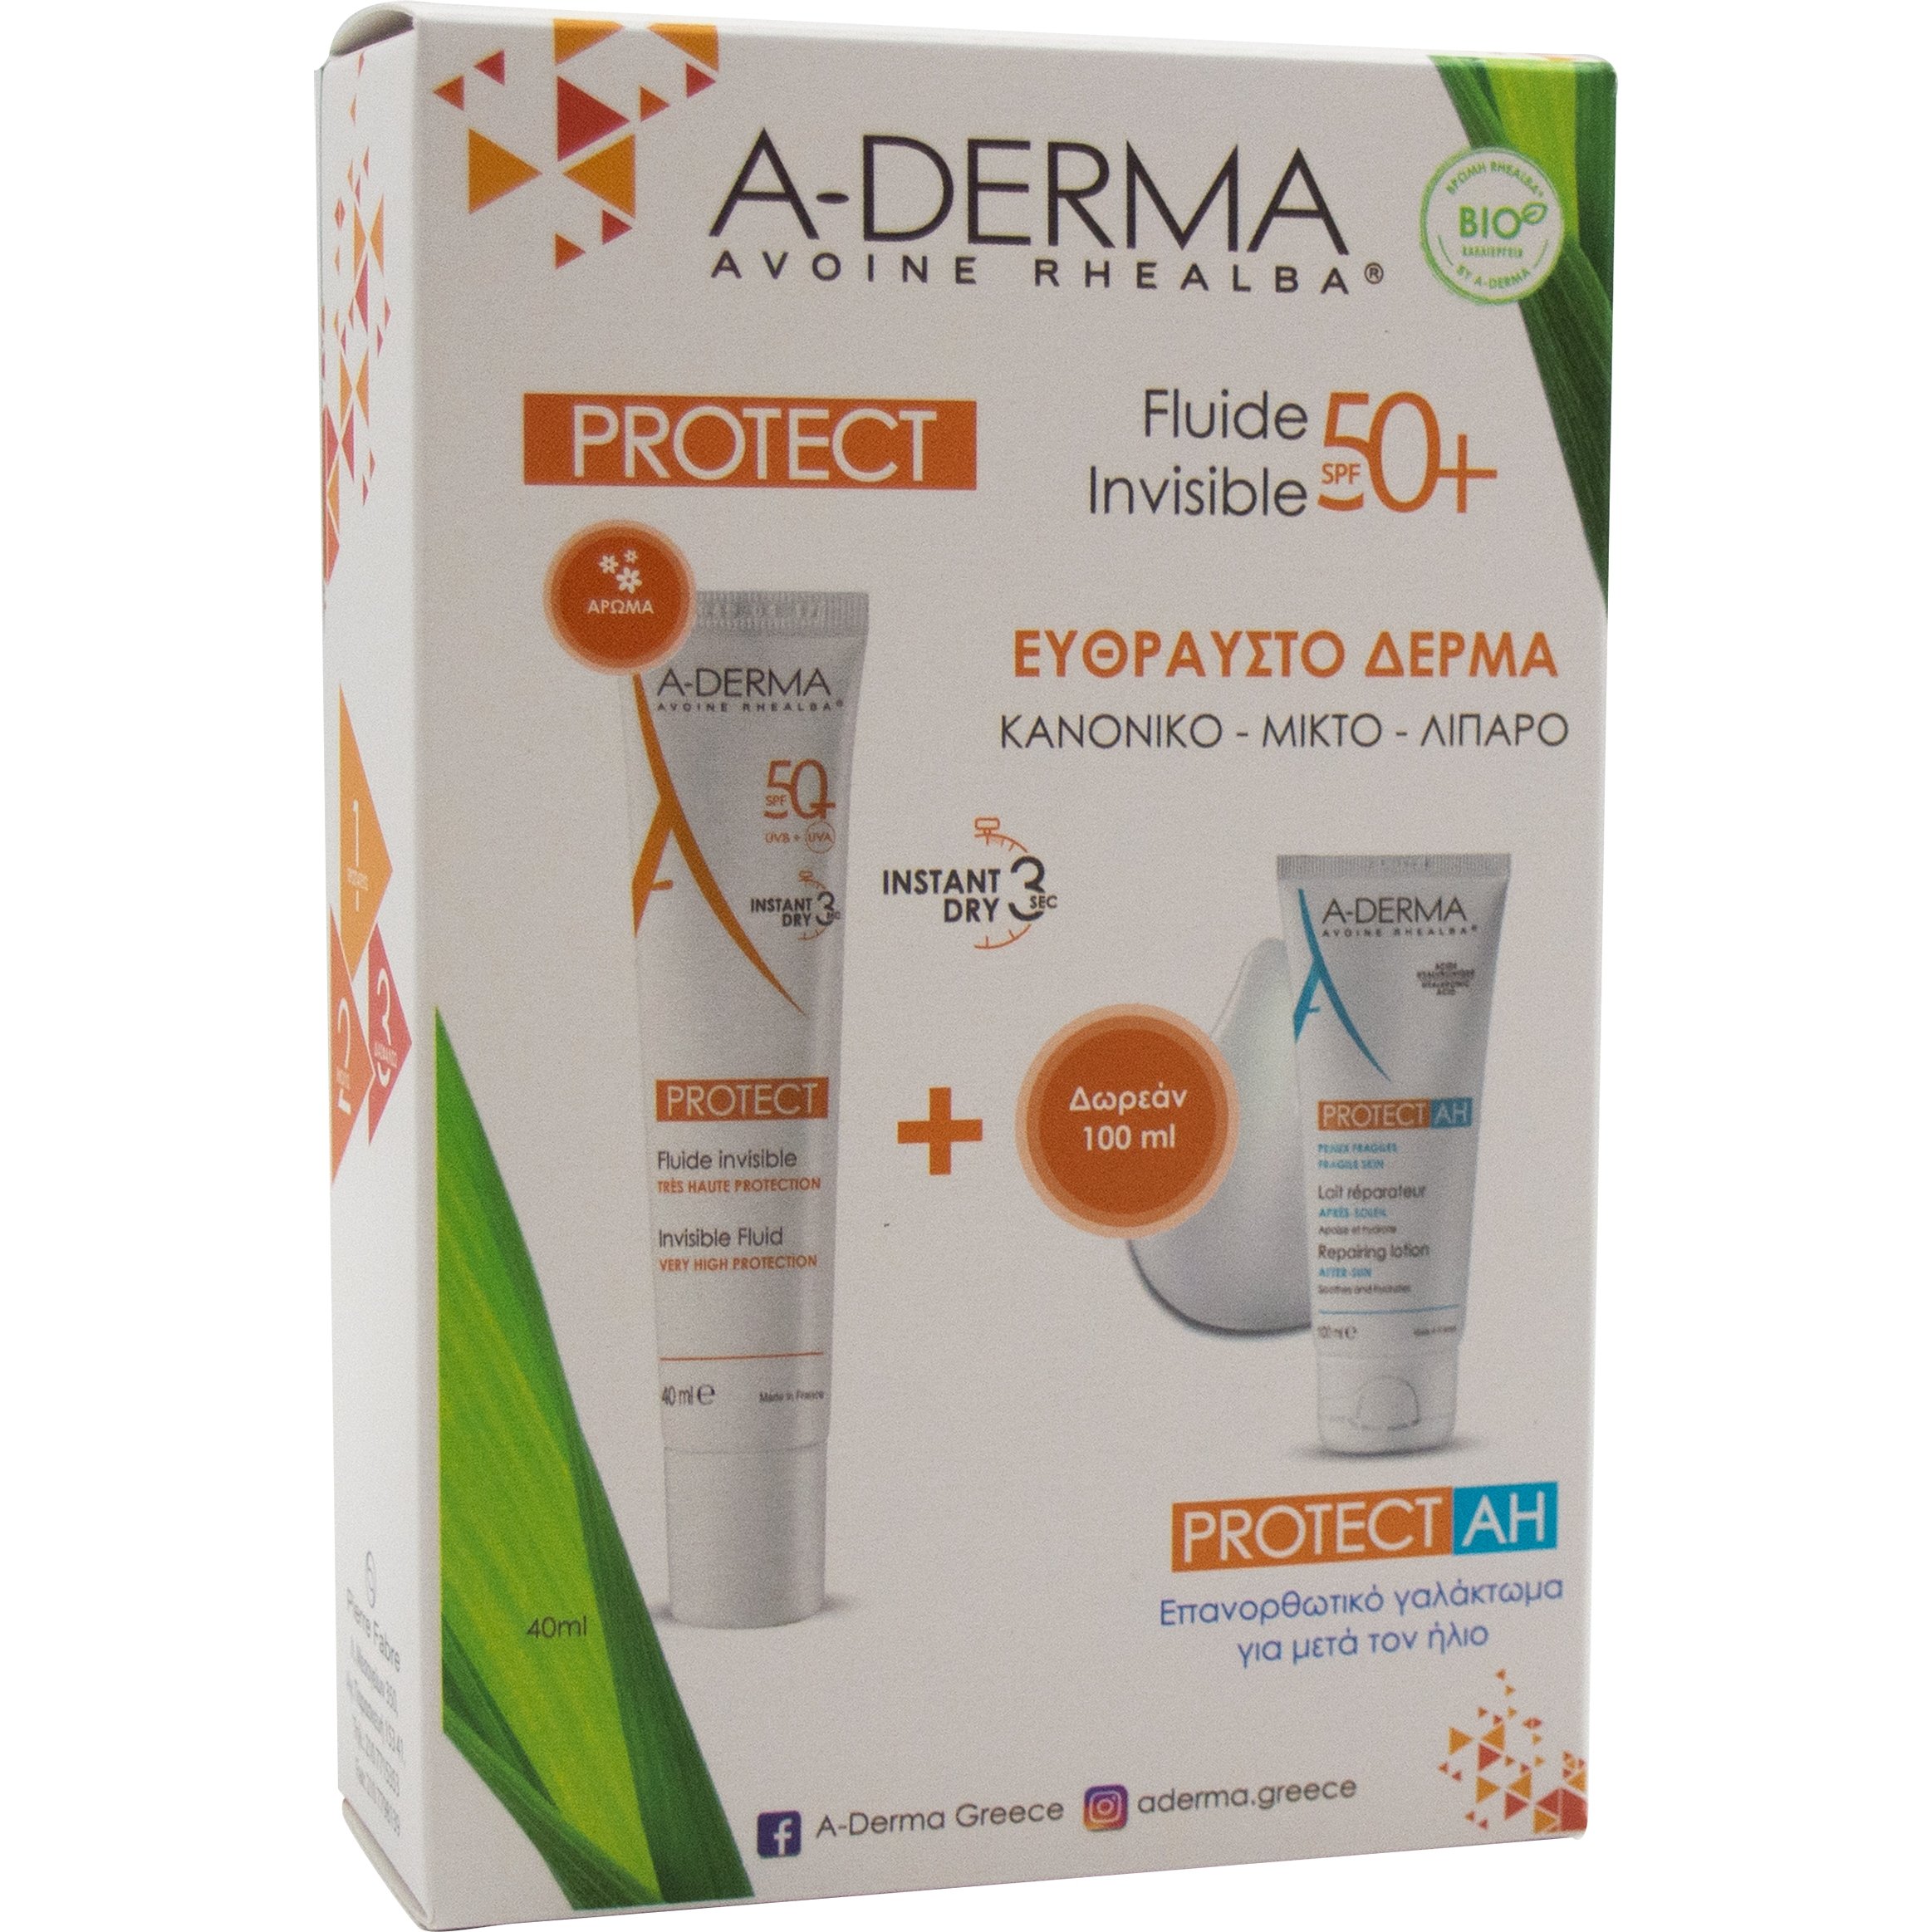 A-Derma Protect Fluide Invisible Λεπτόρευστη Κρέμα Διάφανη Spf50+, 40ml & Protect AH Lait Reparateur Apres-Soleil 100ml